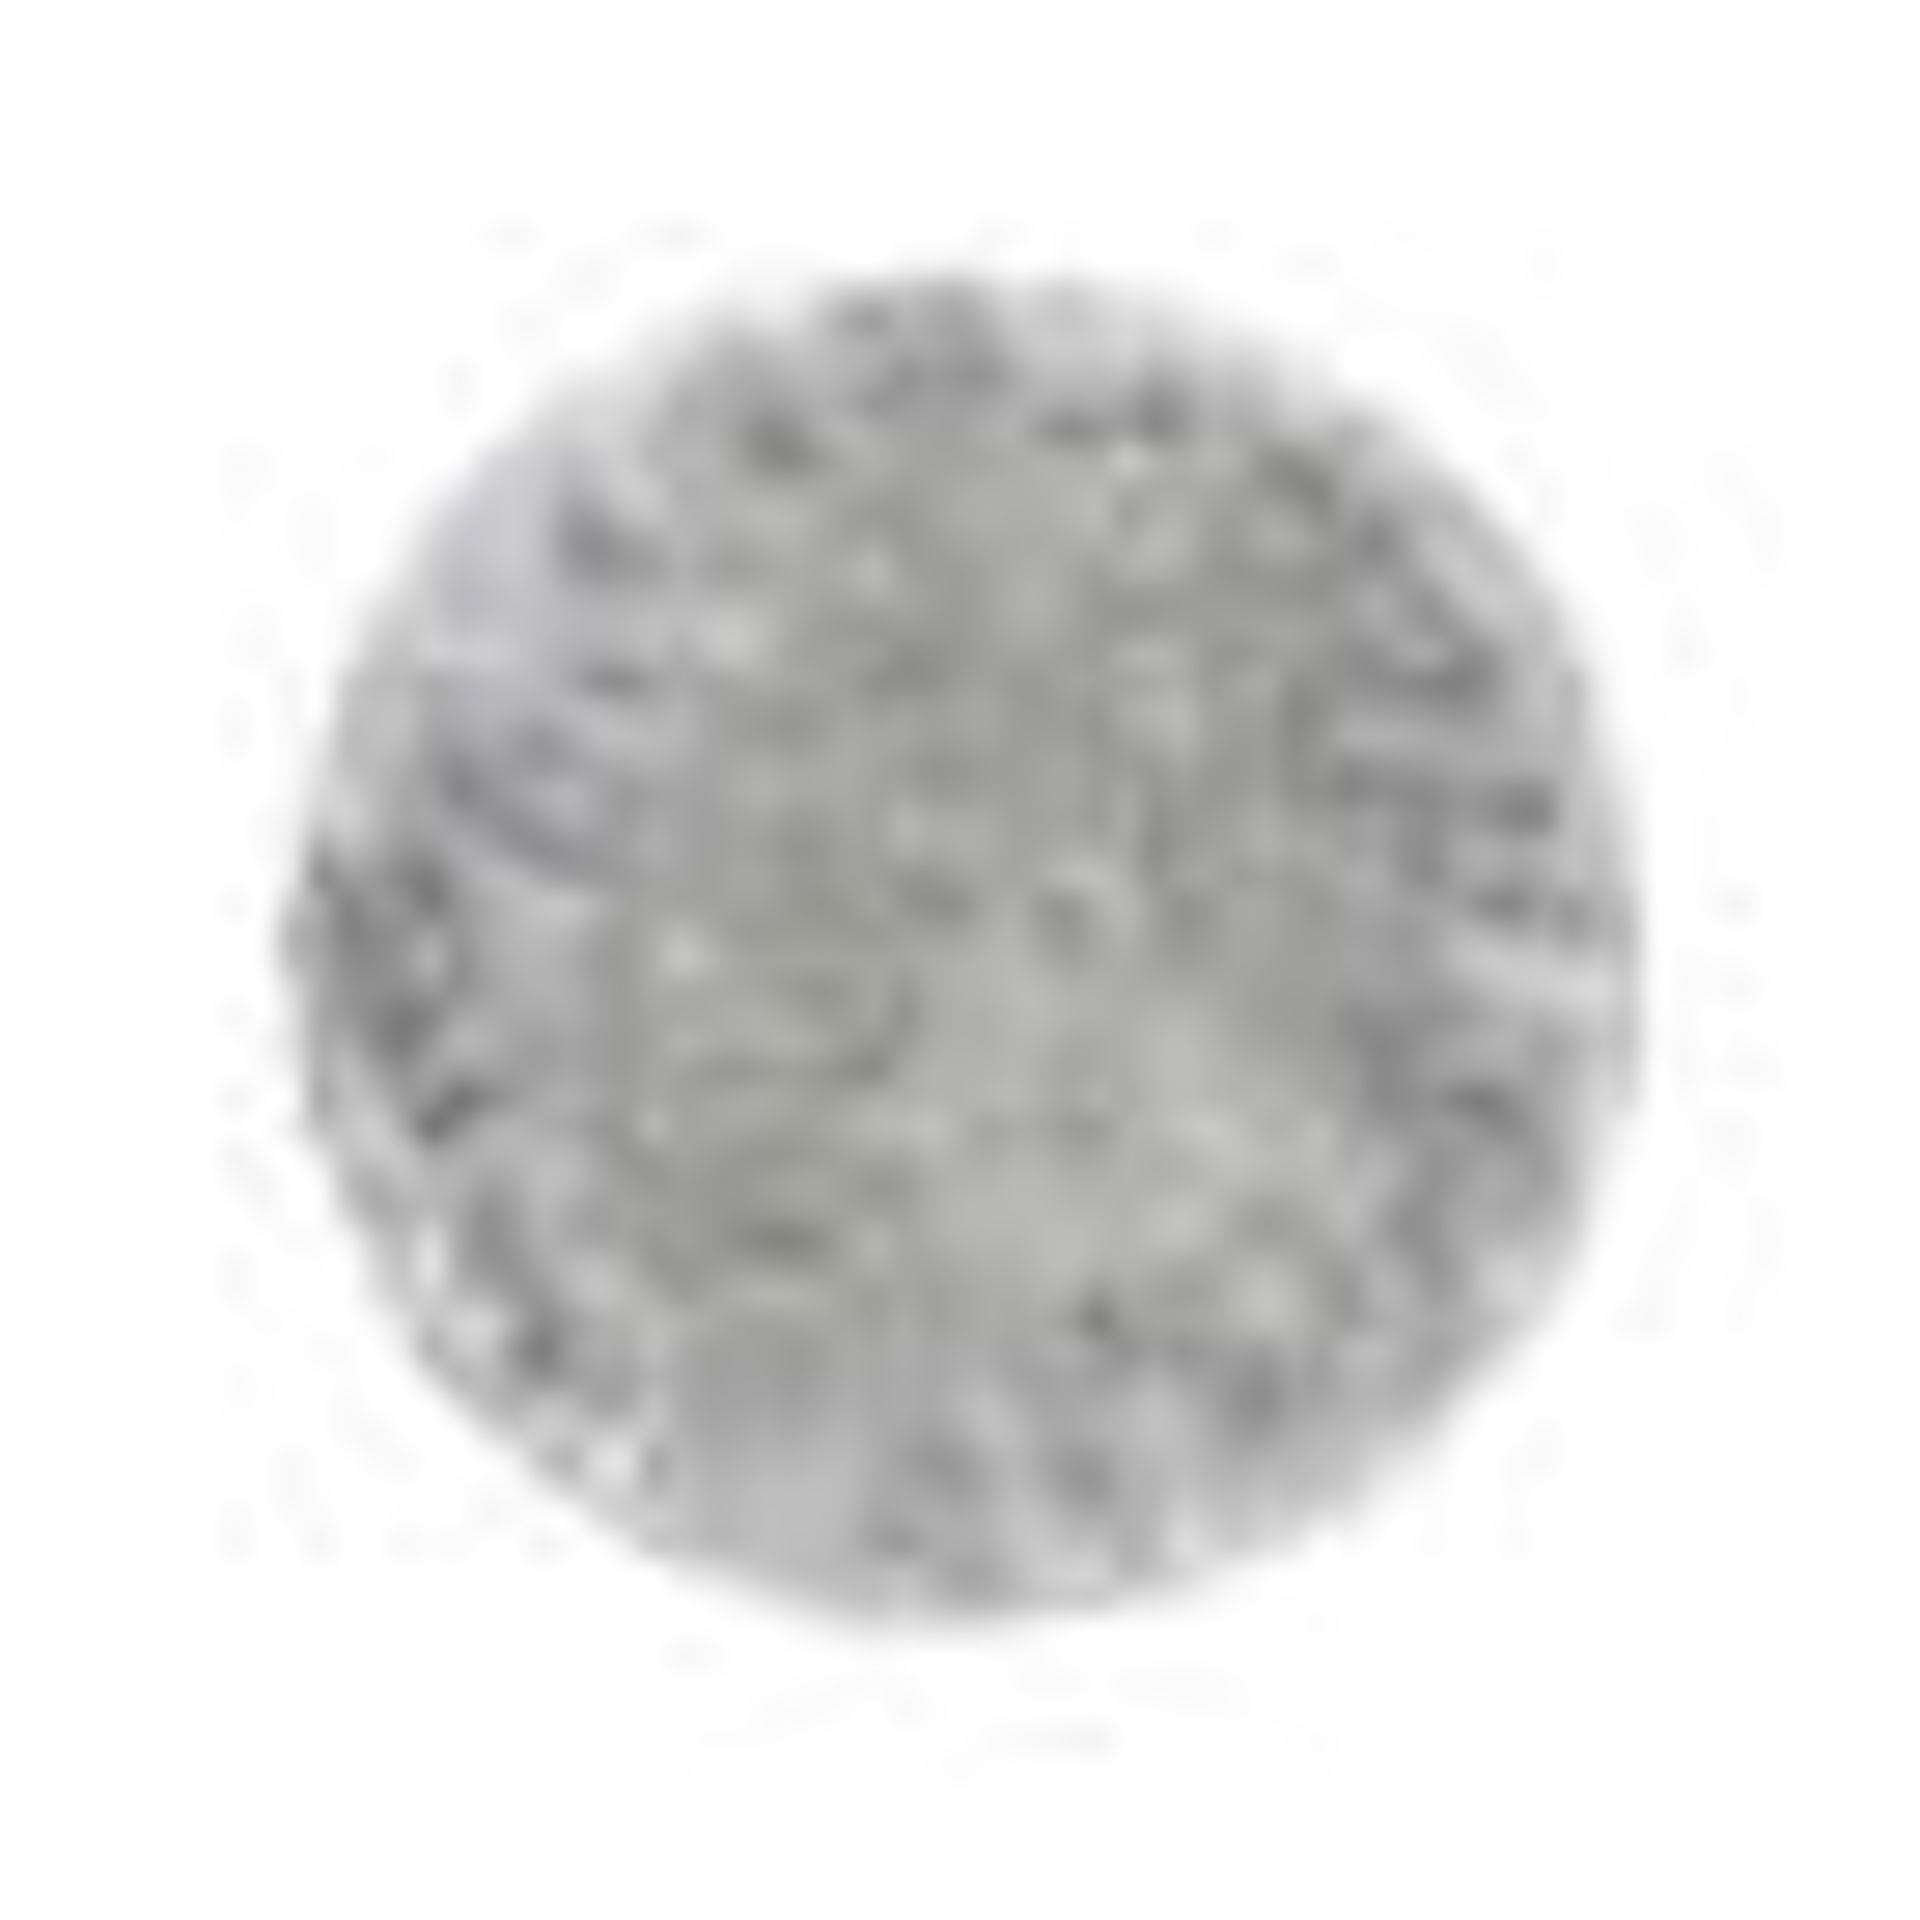 Pearl D040 Rug Jewel Shaggy Silver Circle 180X180cm RRP 159 About the Product(s) Pearl D040 Rug